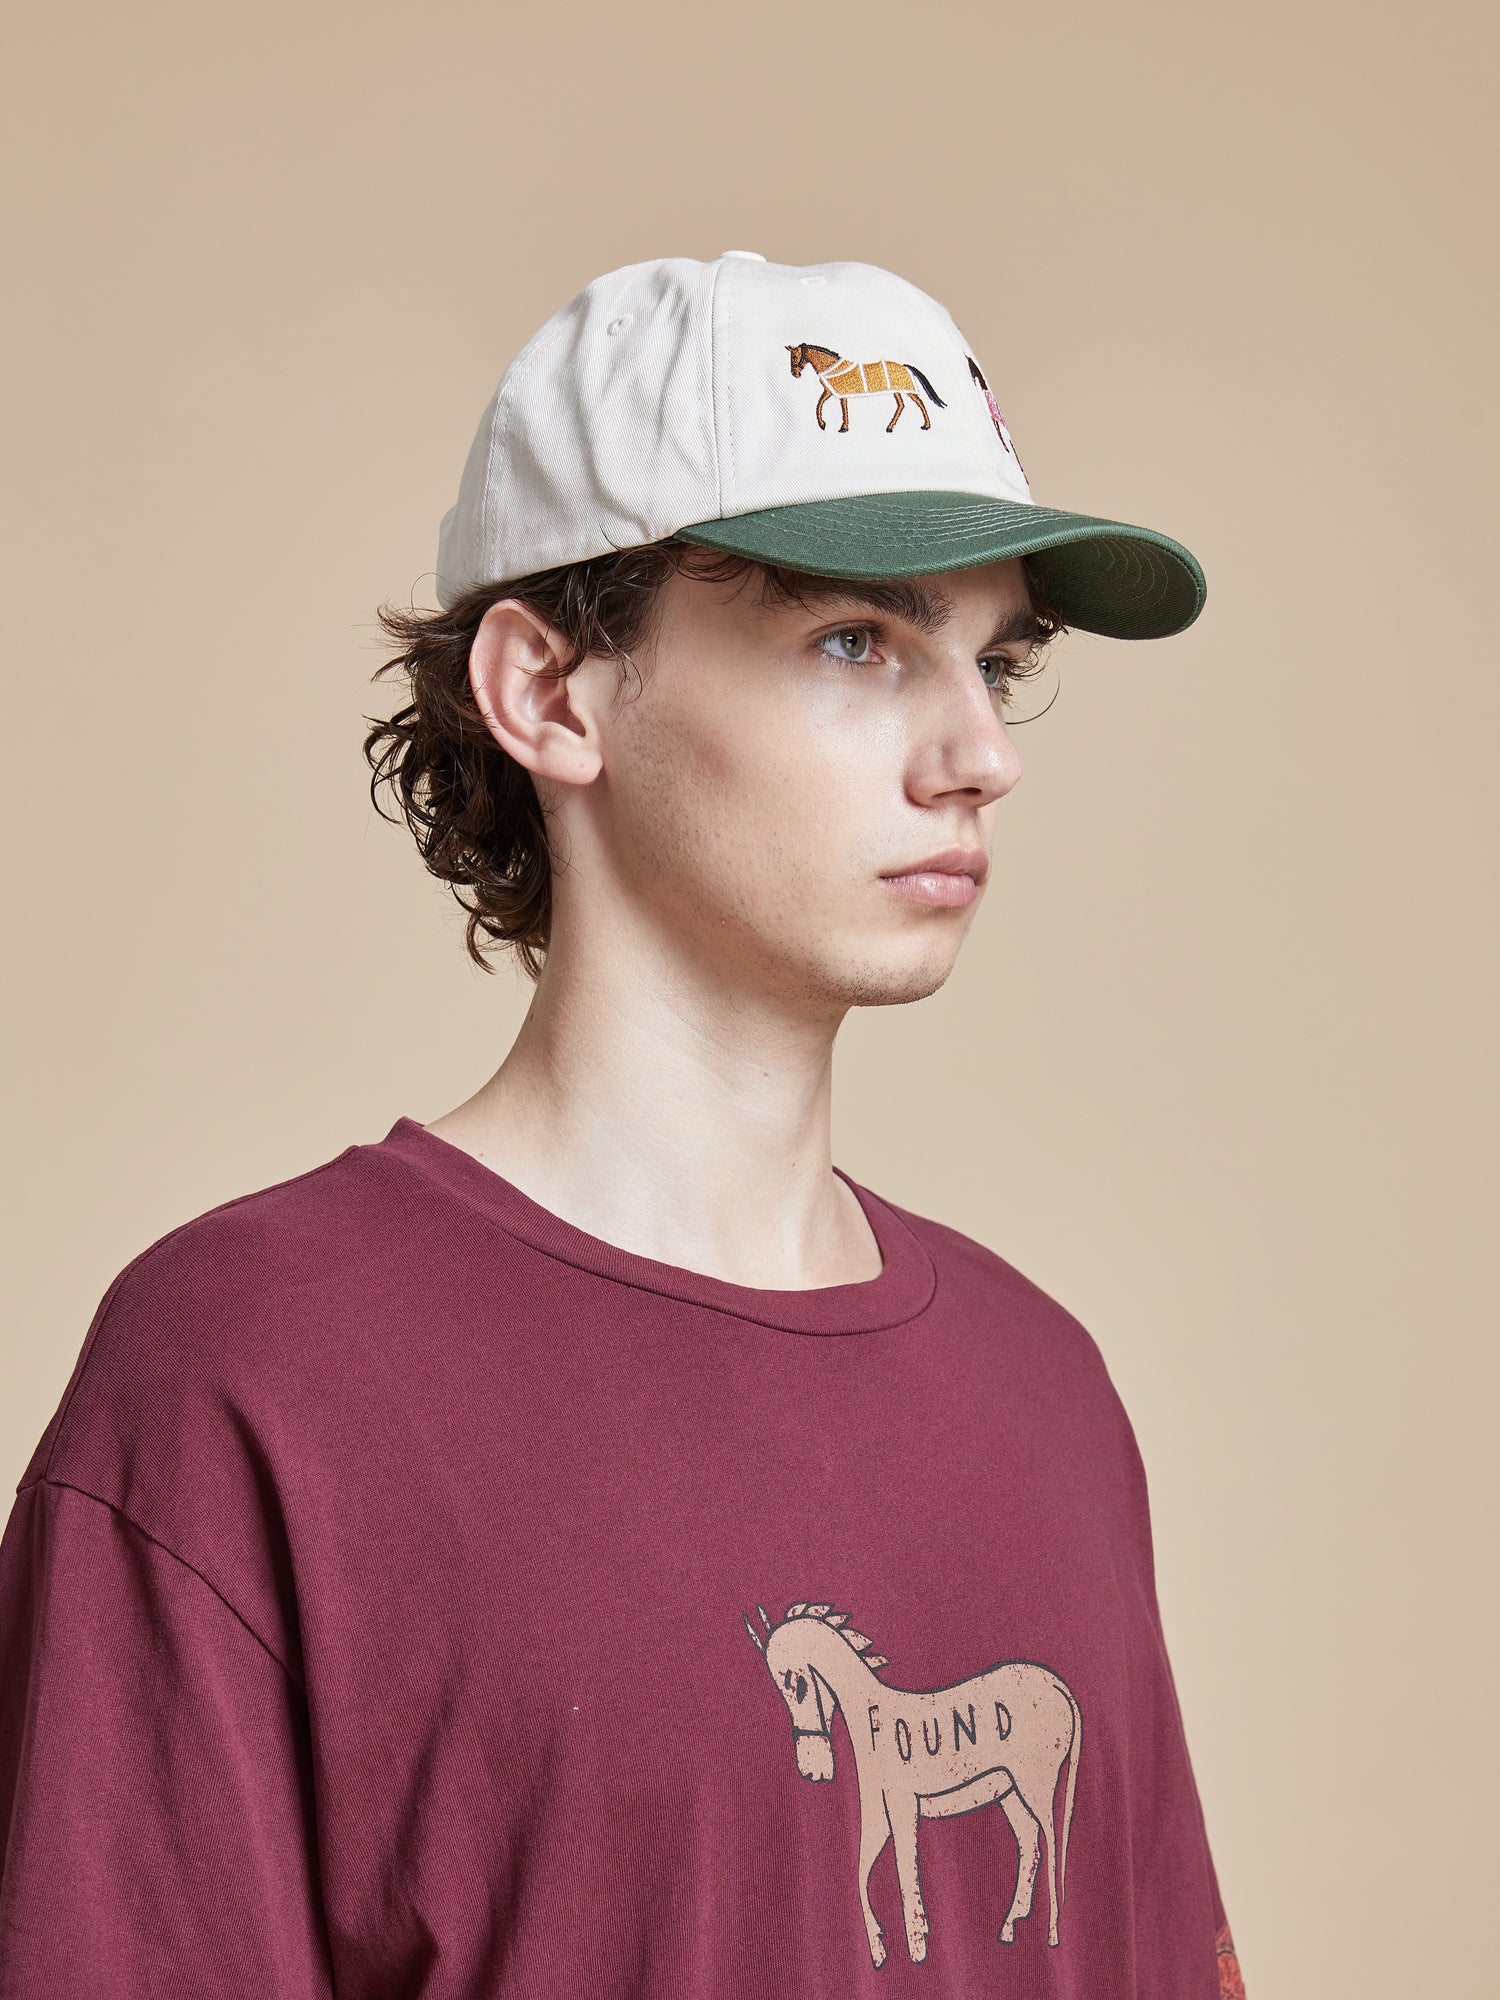 A man wearing a burgundy t-shirt with a Found Horse Equine Cap embroidered on it.